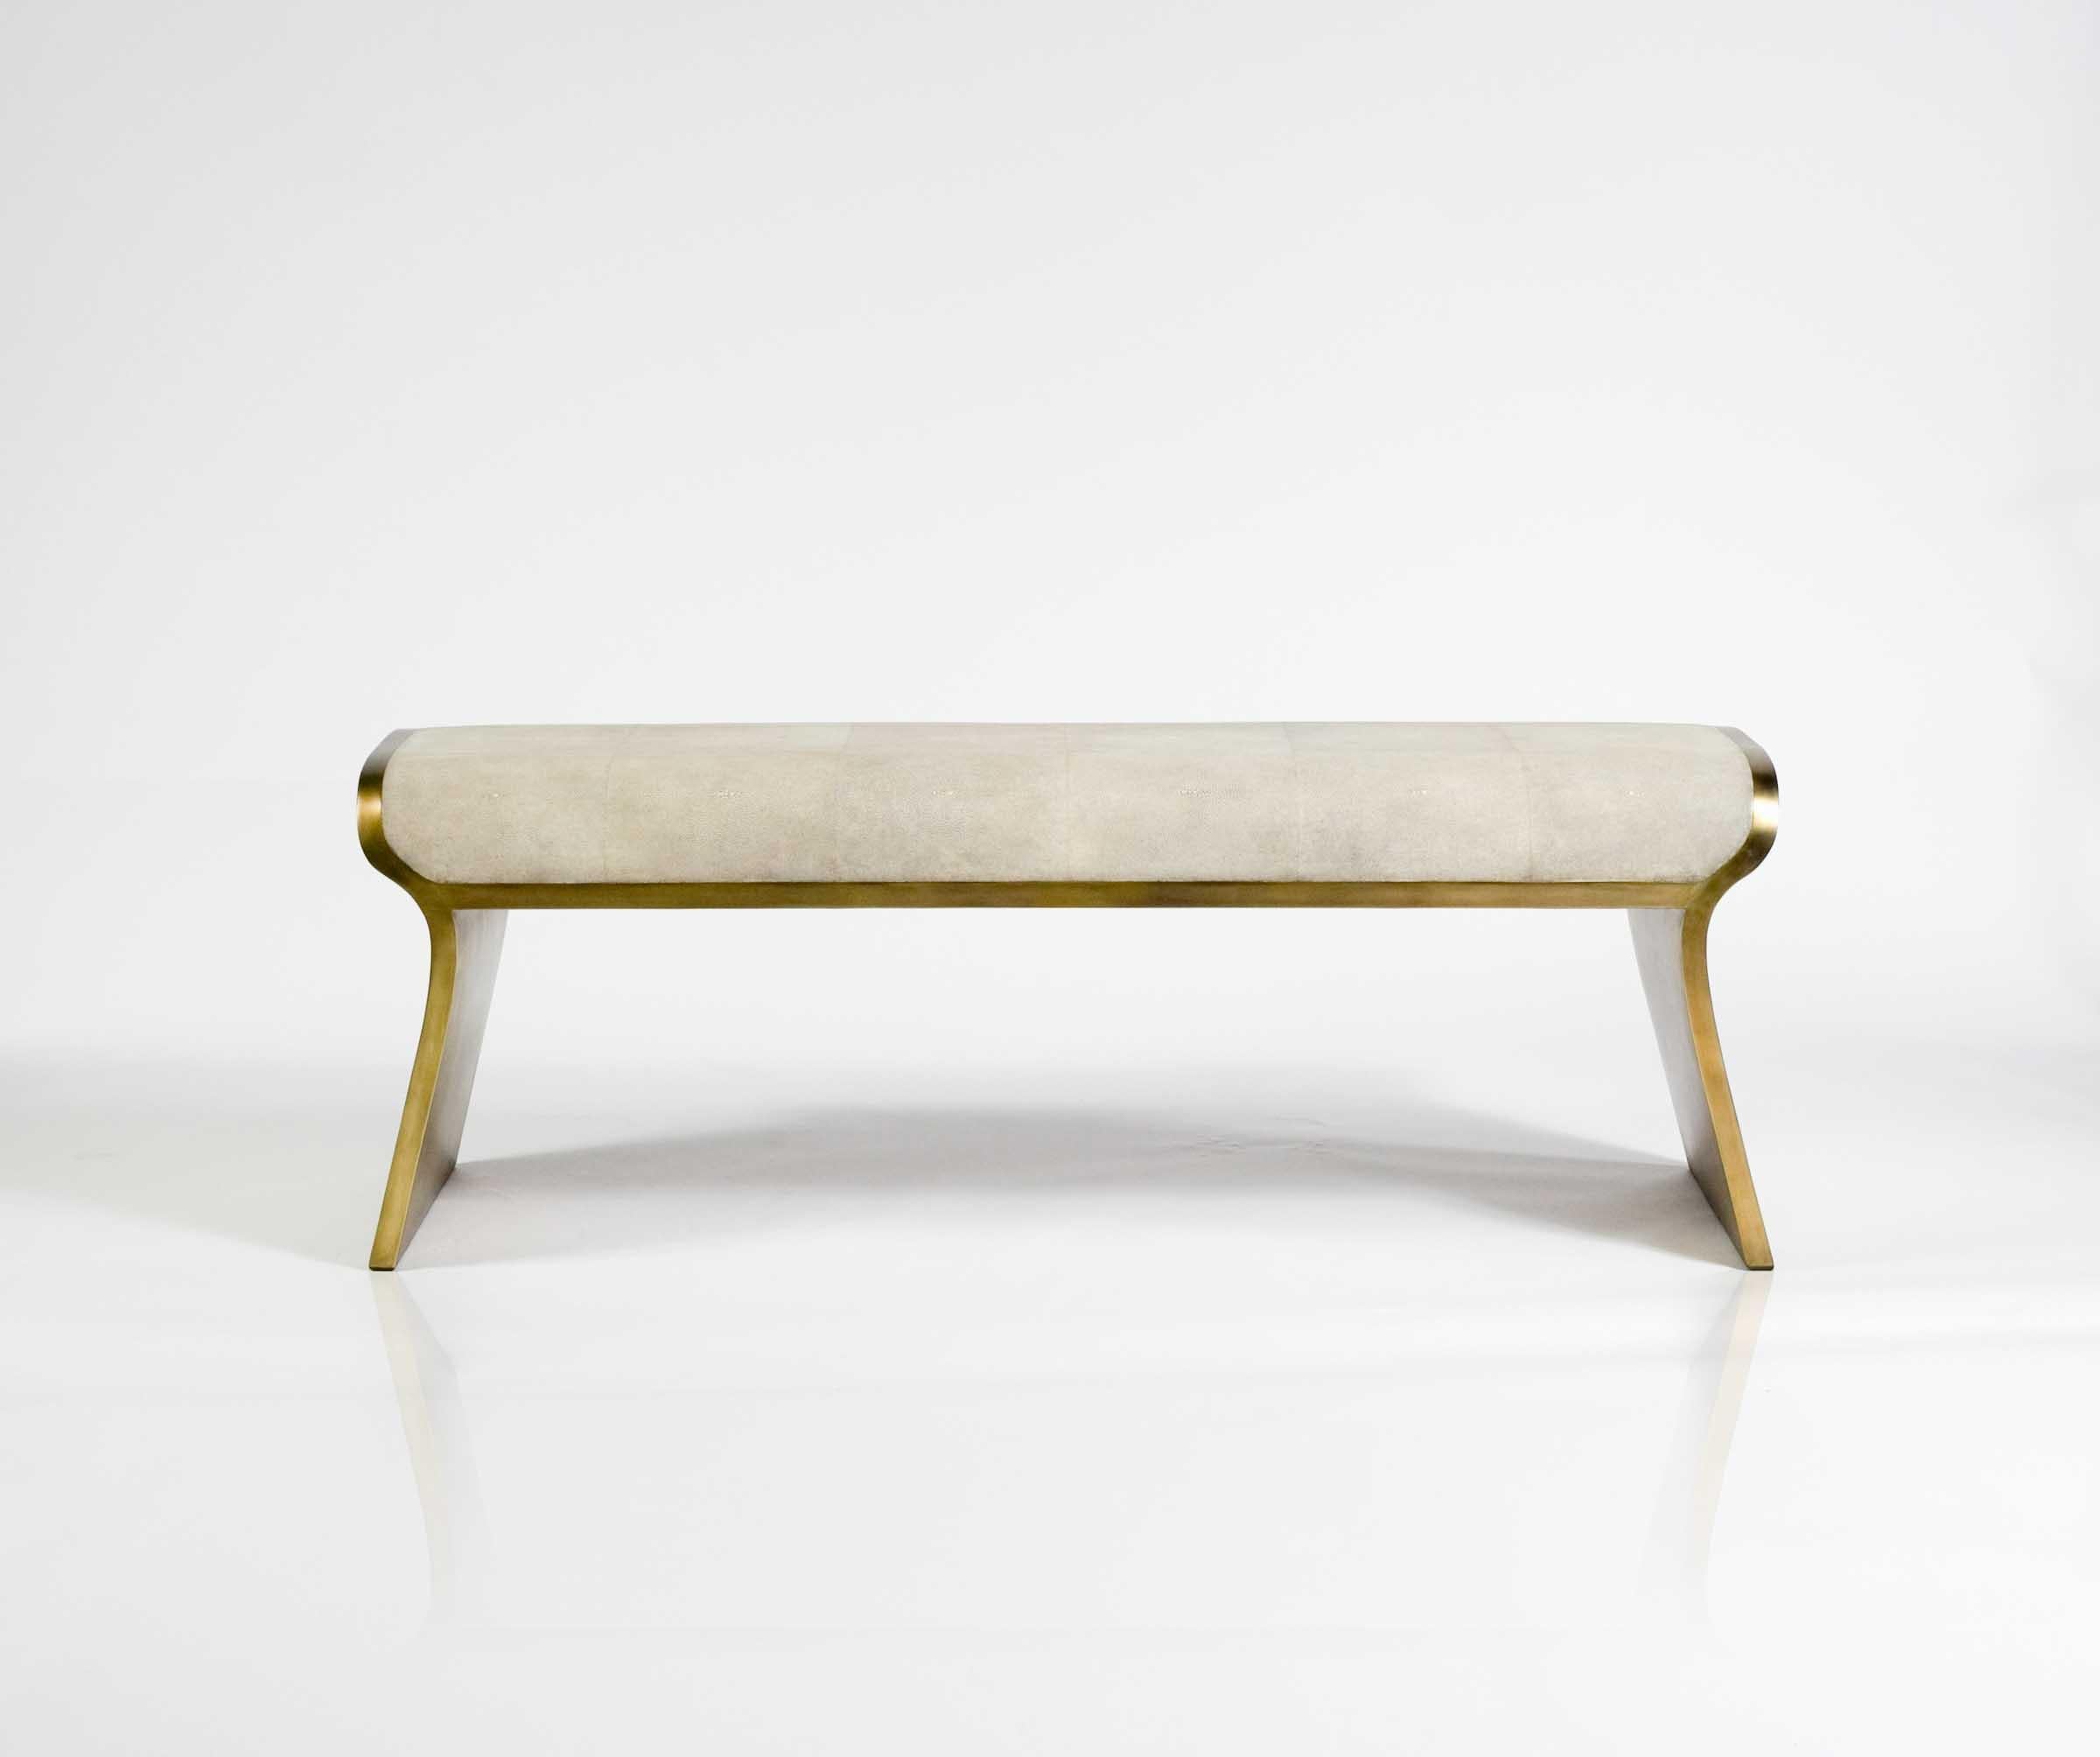 The Dandy day bench is the ultimate luxury seating. The seating area is inlaid in cream shagreen and the frame and sides of the bench are completely inlaid in bronze-patina brass. A black shagreen version is available see image at end of slide. A